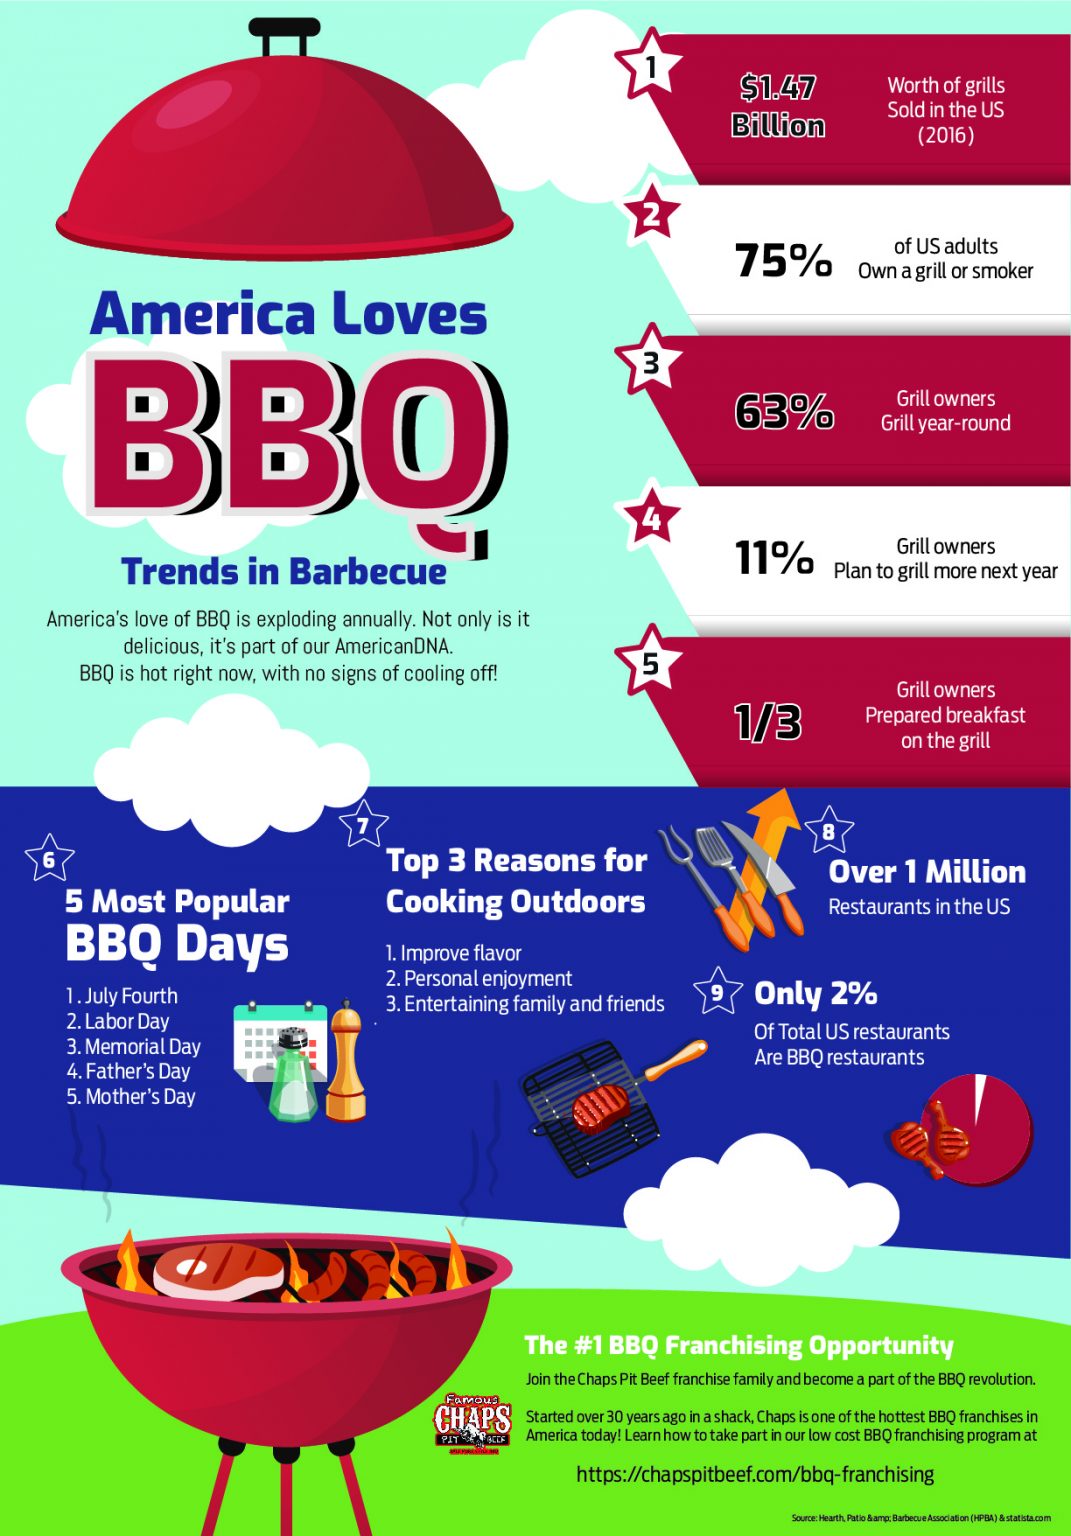 America Loves BBQ Trends in Barbecue [Infographic]